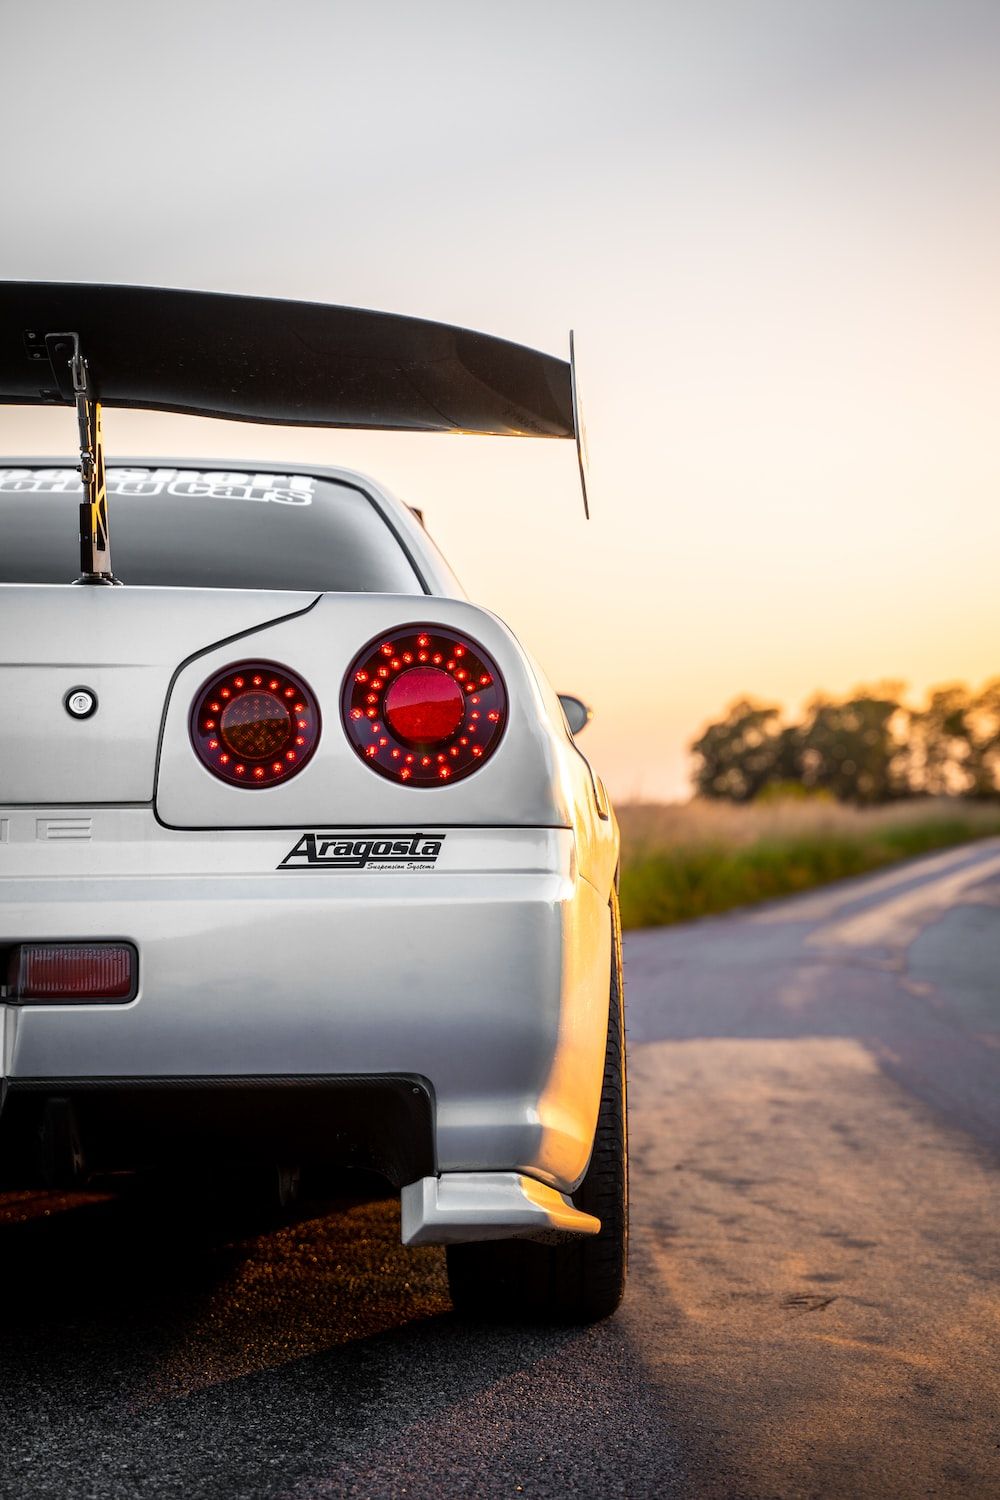 Nissan Skyline R34 Picture. Download Free Image